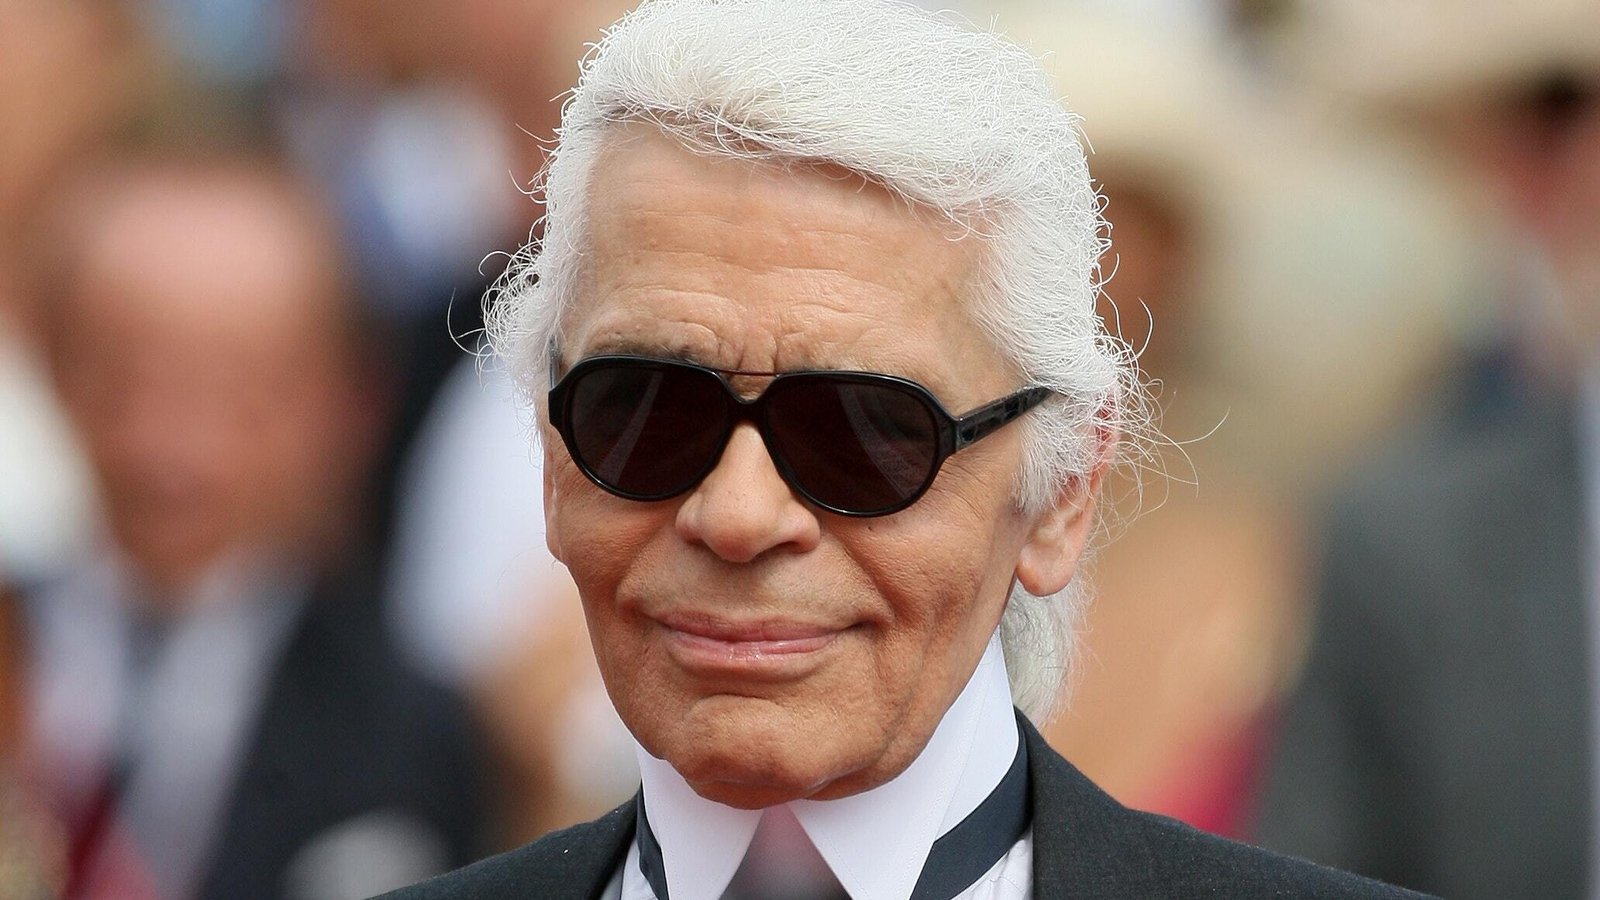 zoete smaak Zakenman bad 7 things you need to know about Karl Lagerfeld